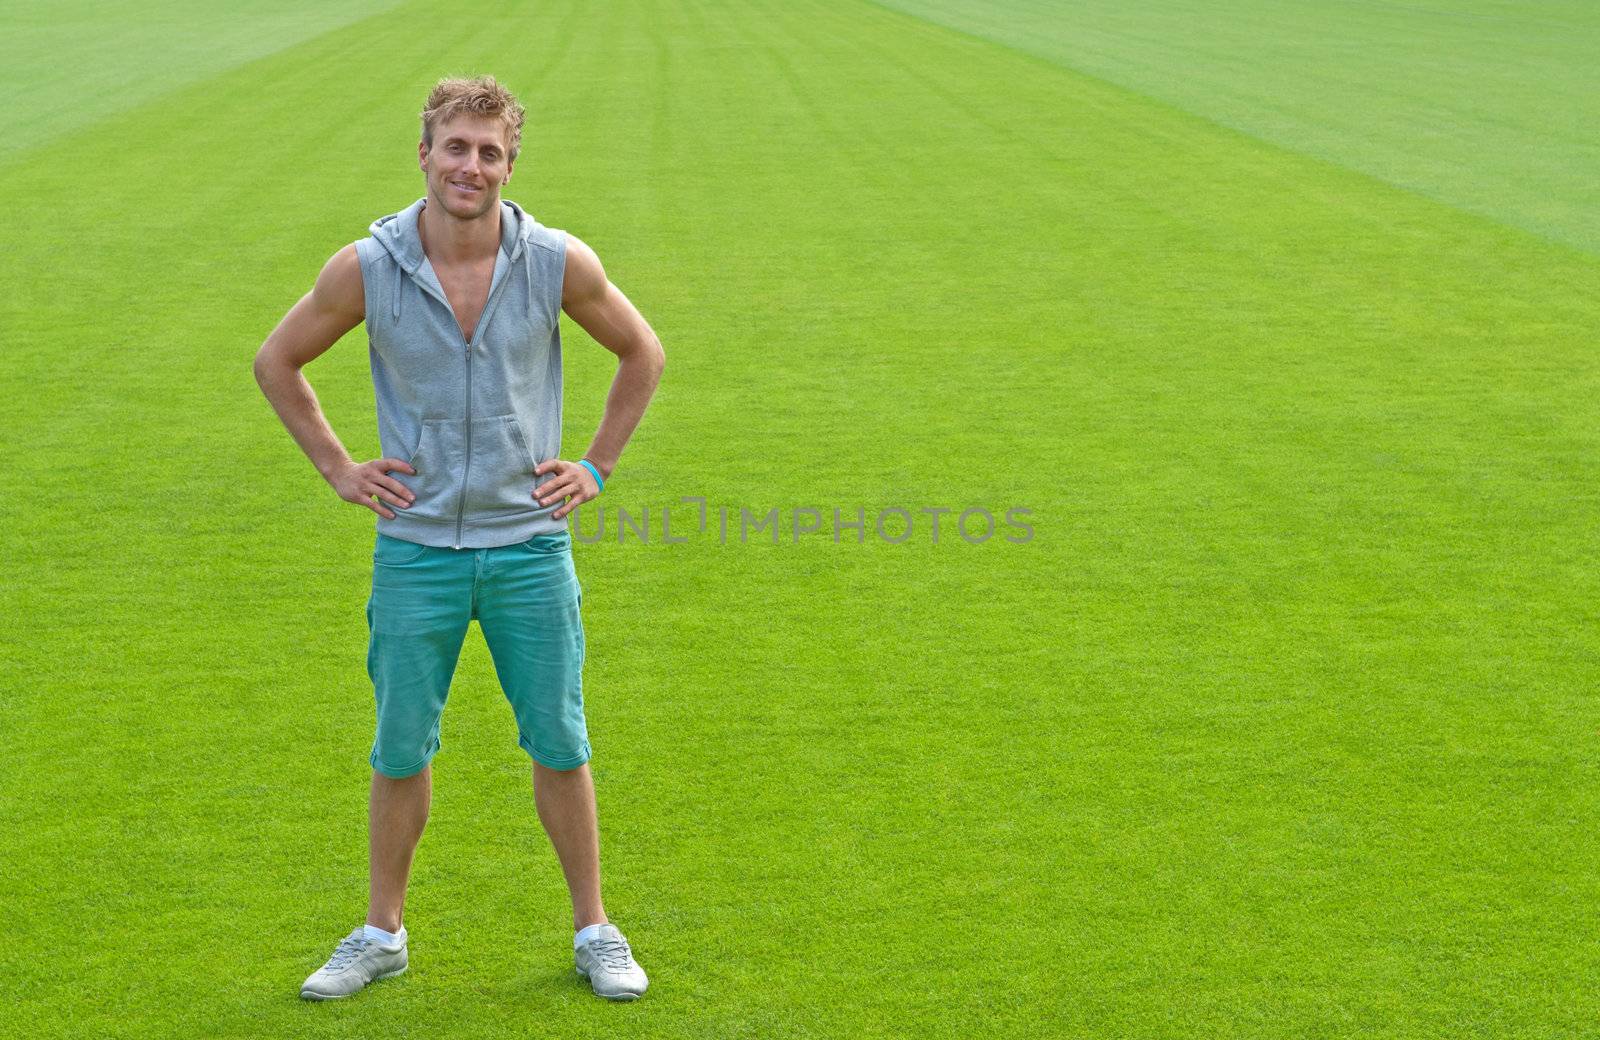 Sporty young man standing on green training field, smiling.